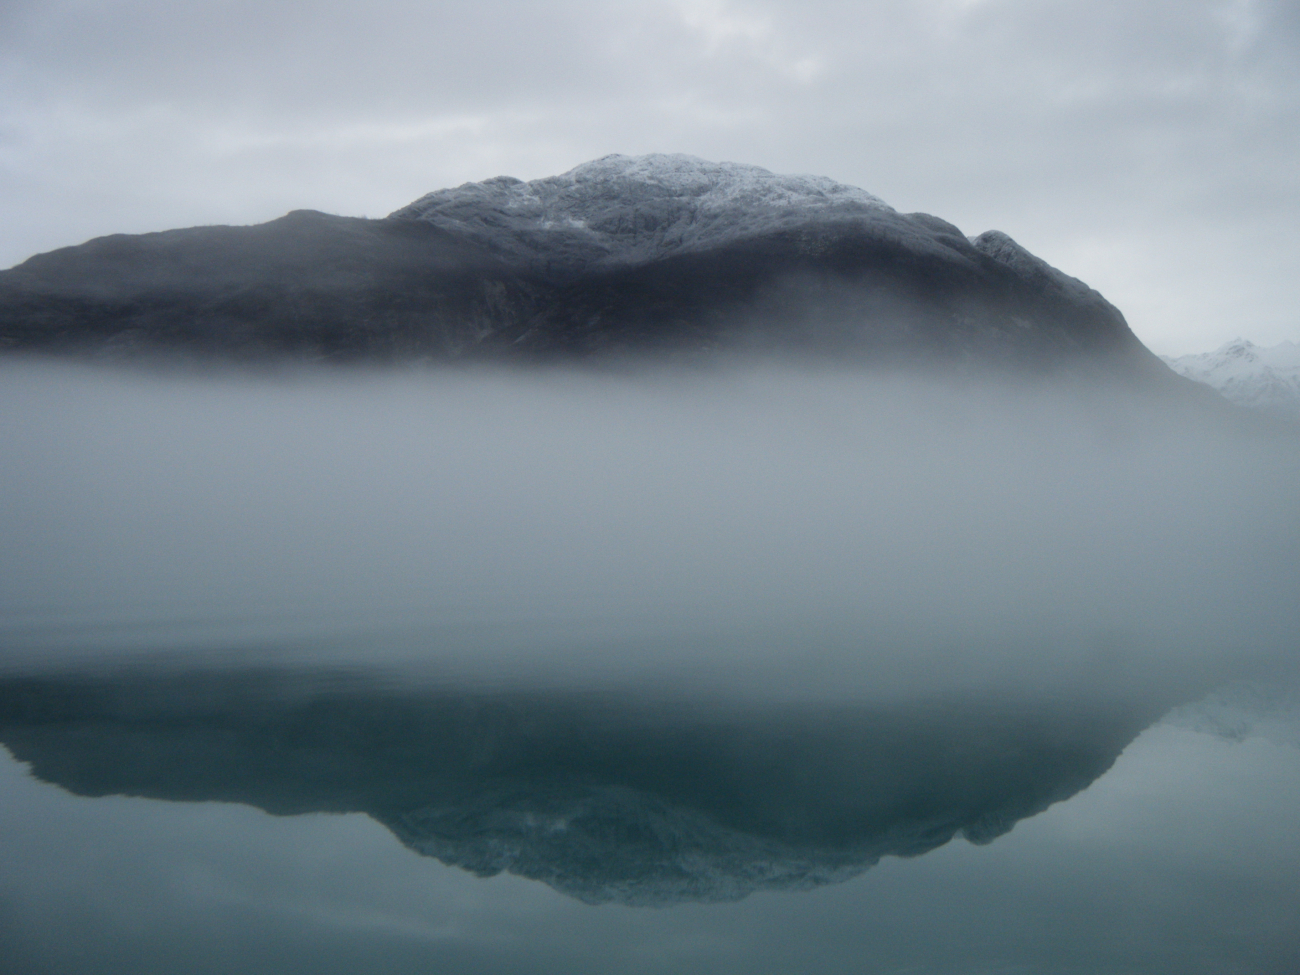 Mountain, a wisp of fog, and reflection in Glacier Bay